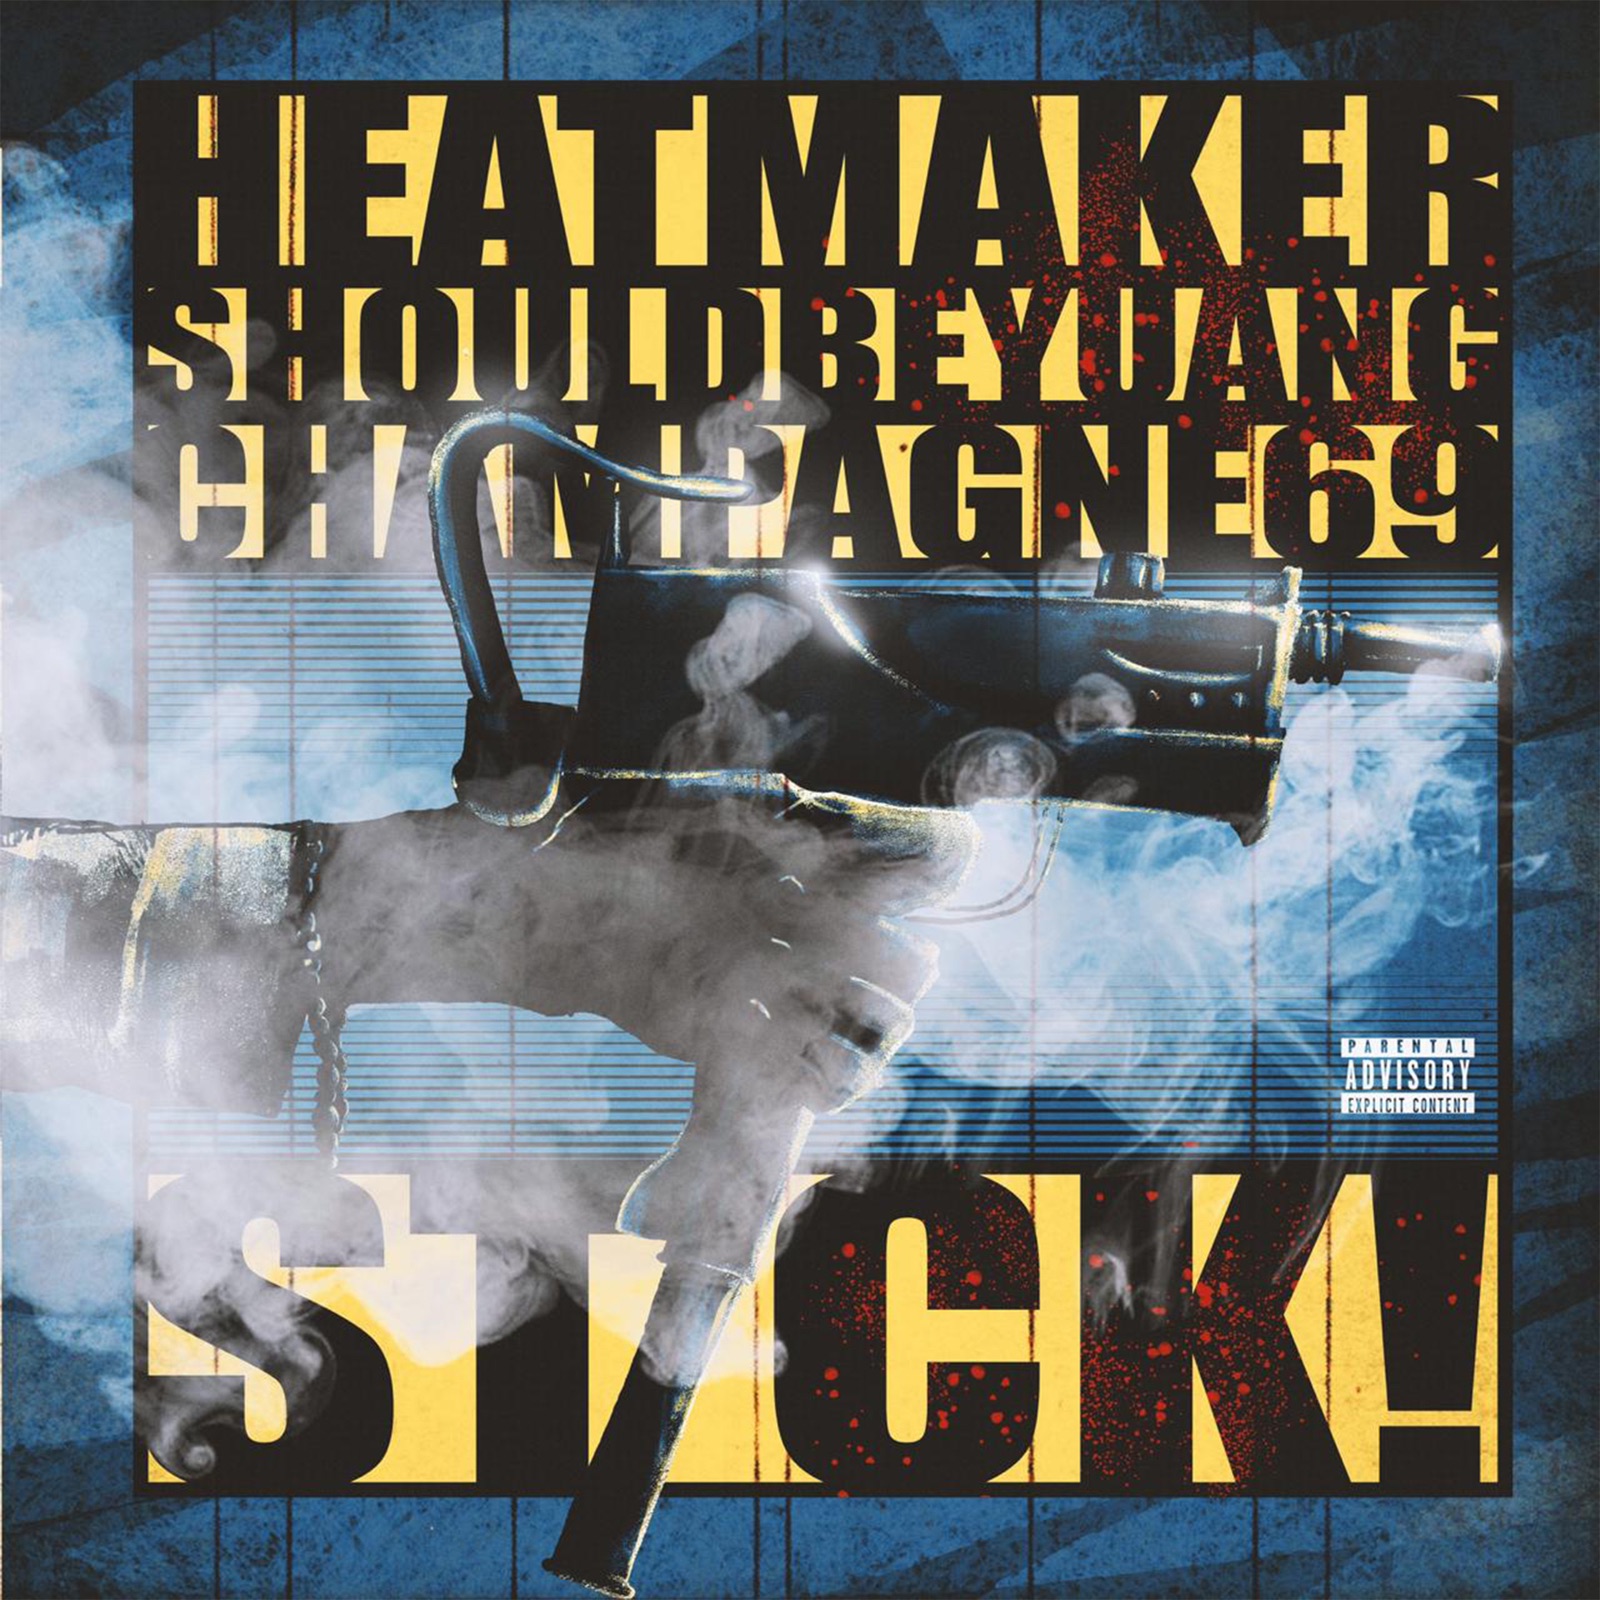 Stick! (feat. Champagne 69 & Shouldbeyuang) - Single